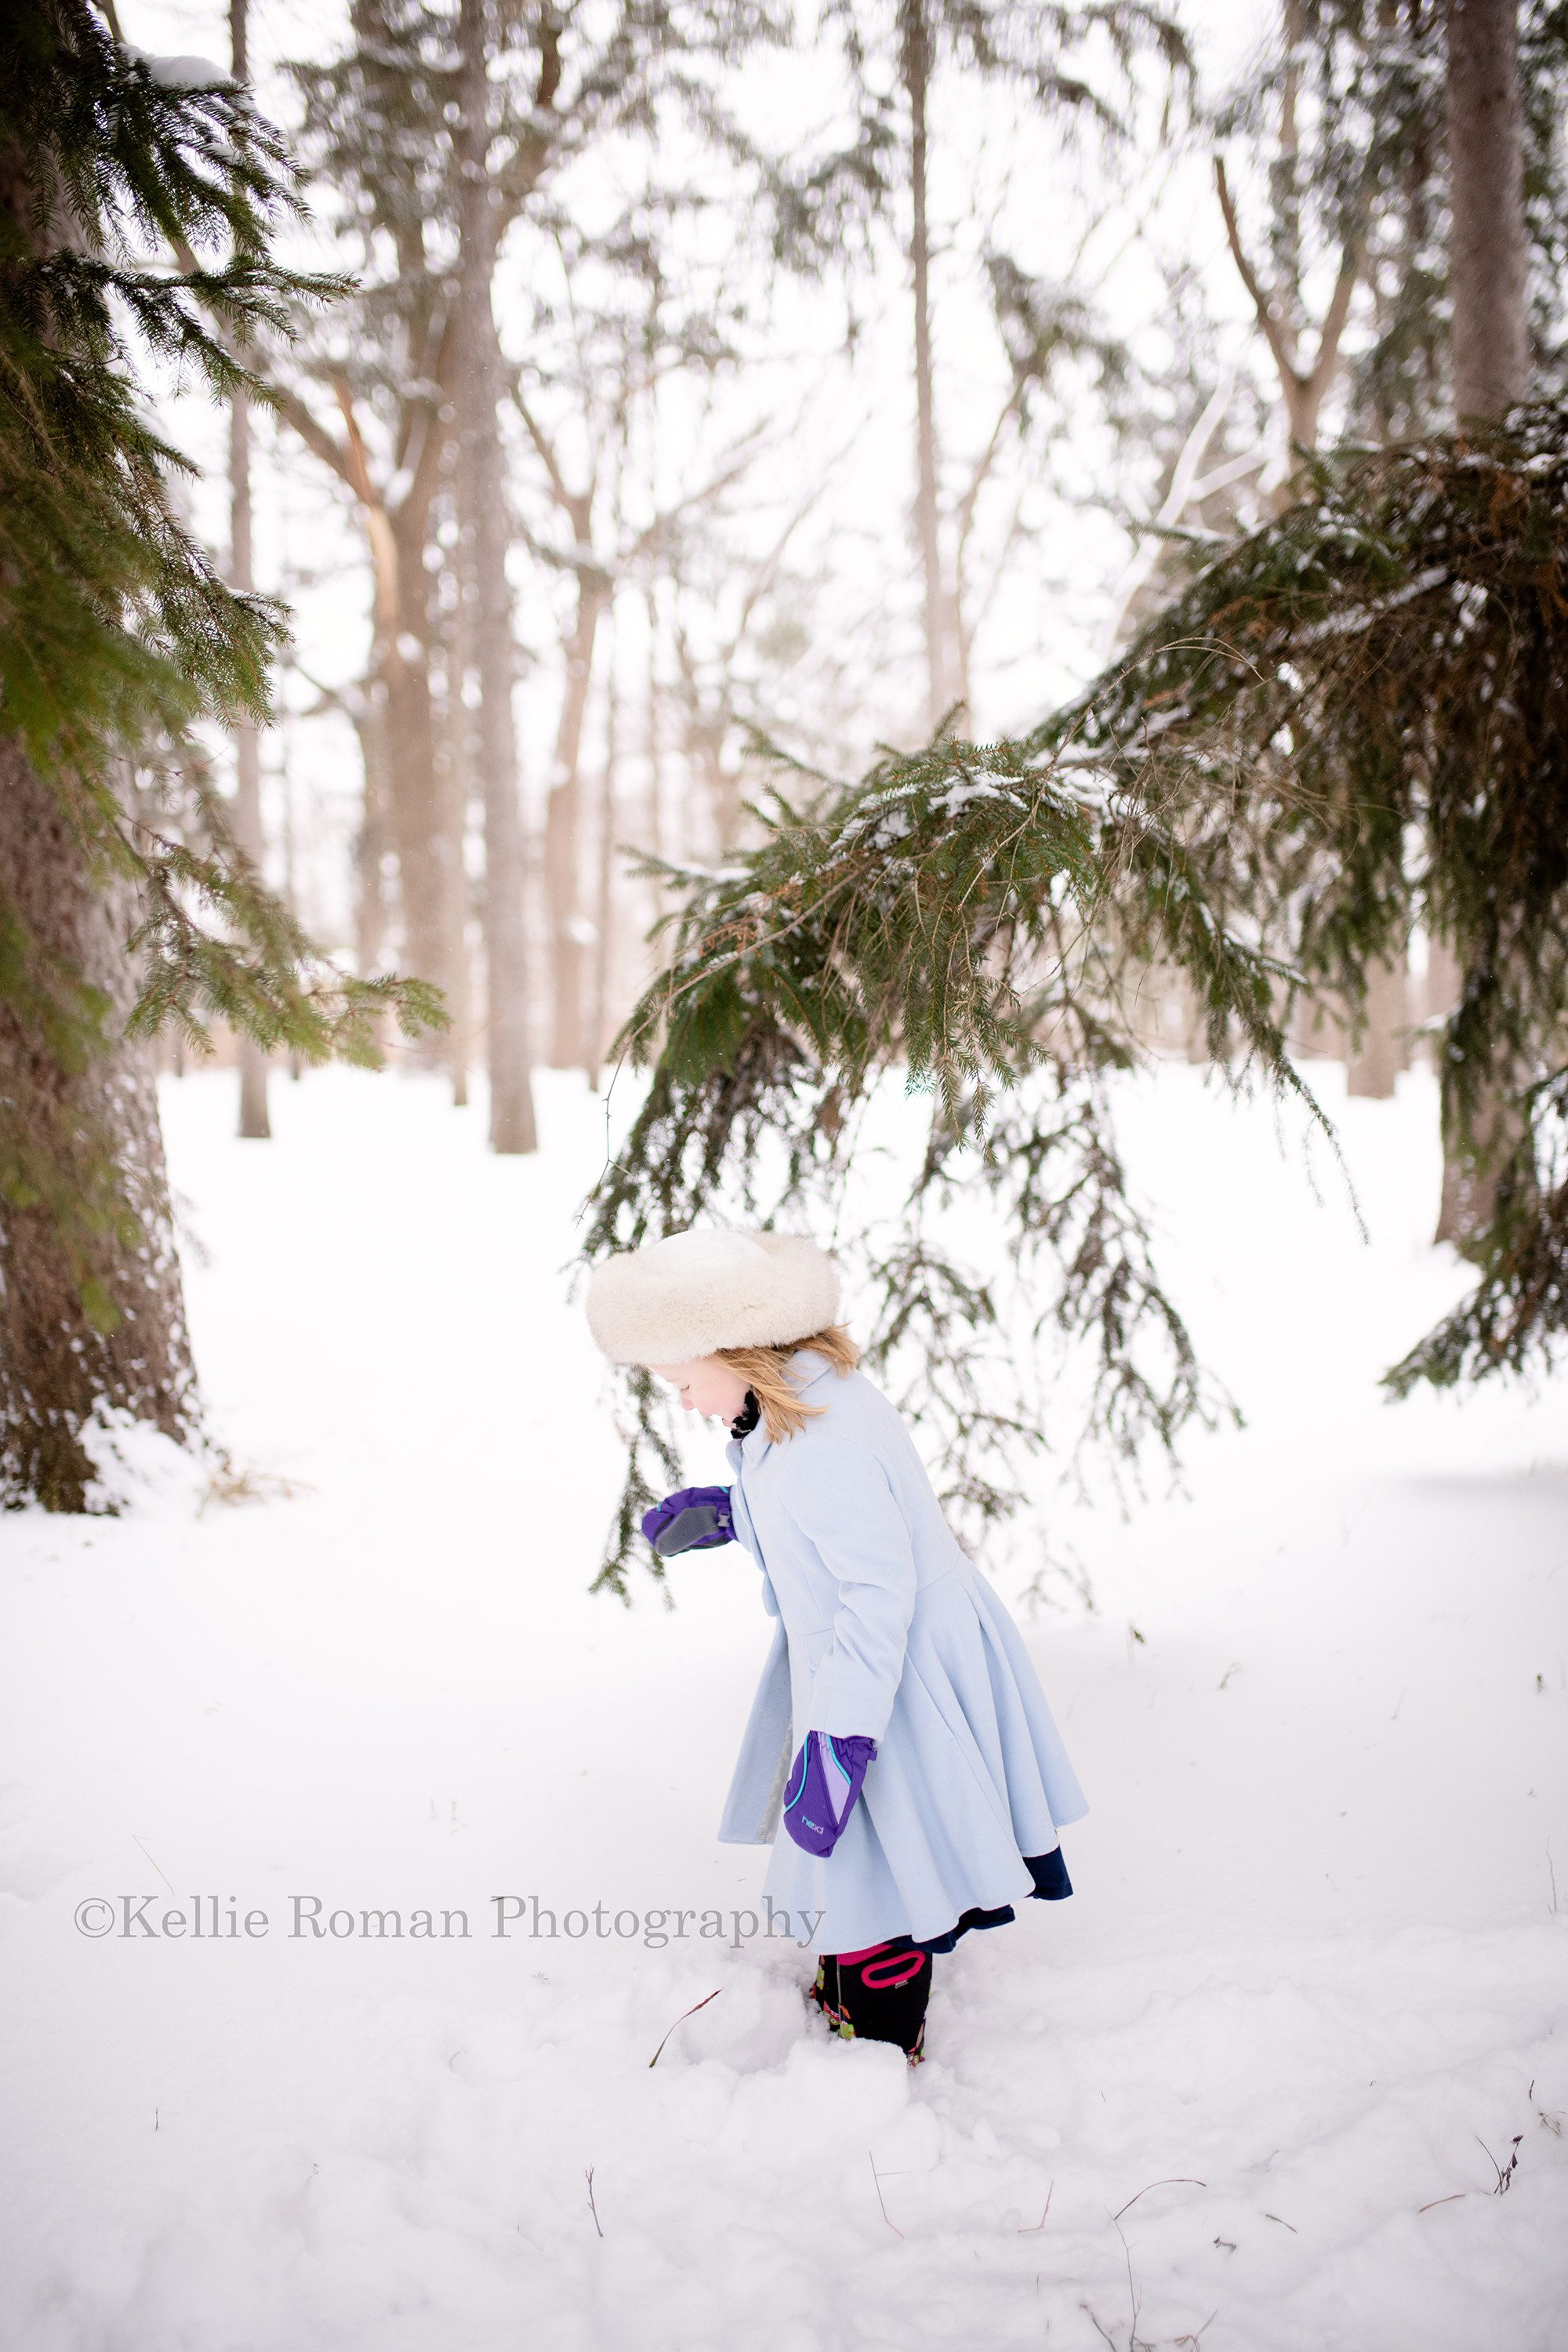 milwaukee snowfall a little girl is standing in a lot of fresh snow in a milwaukee park she is looking down at the Snow White wearing a blue peacoat, boots, mittens, and a white fur hat. She is among lots of tall snow covered pine trees.